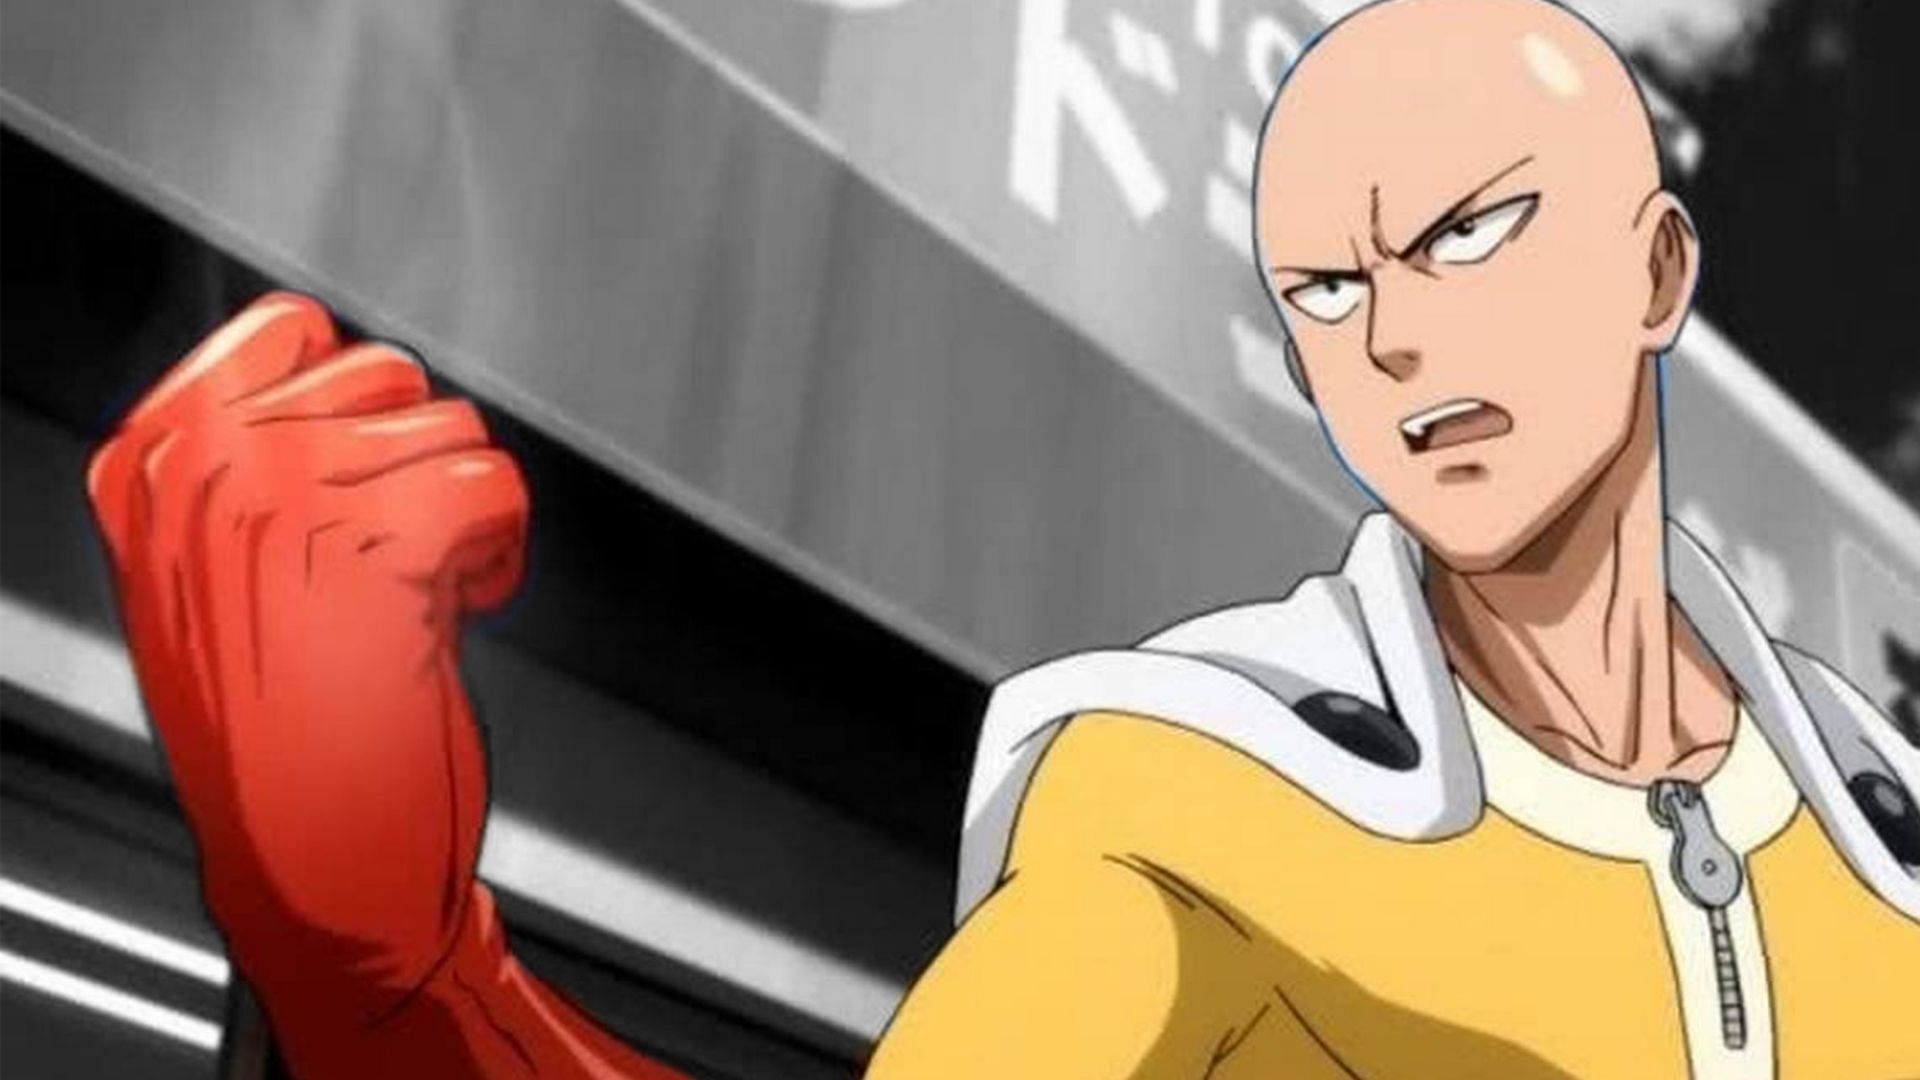 Saitama is always there to protect the innocent (Image via ONE, One Punch Man)